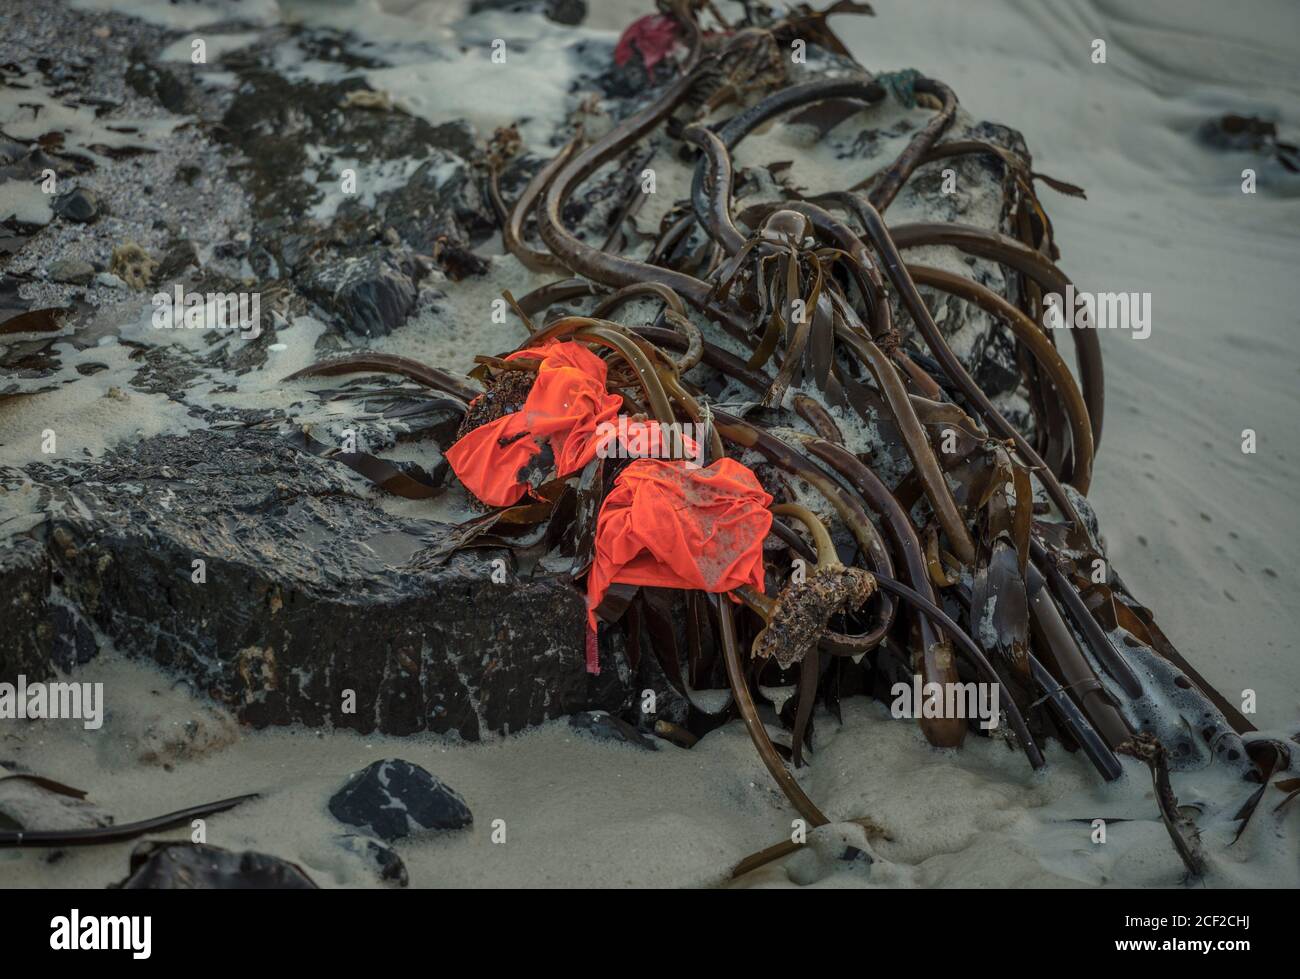 Bright red windbreaker jacket washed ashore and settled on a pile of seaweed beached during a storm at sea. Cape Town, South Africa. Stock Photo